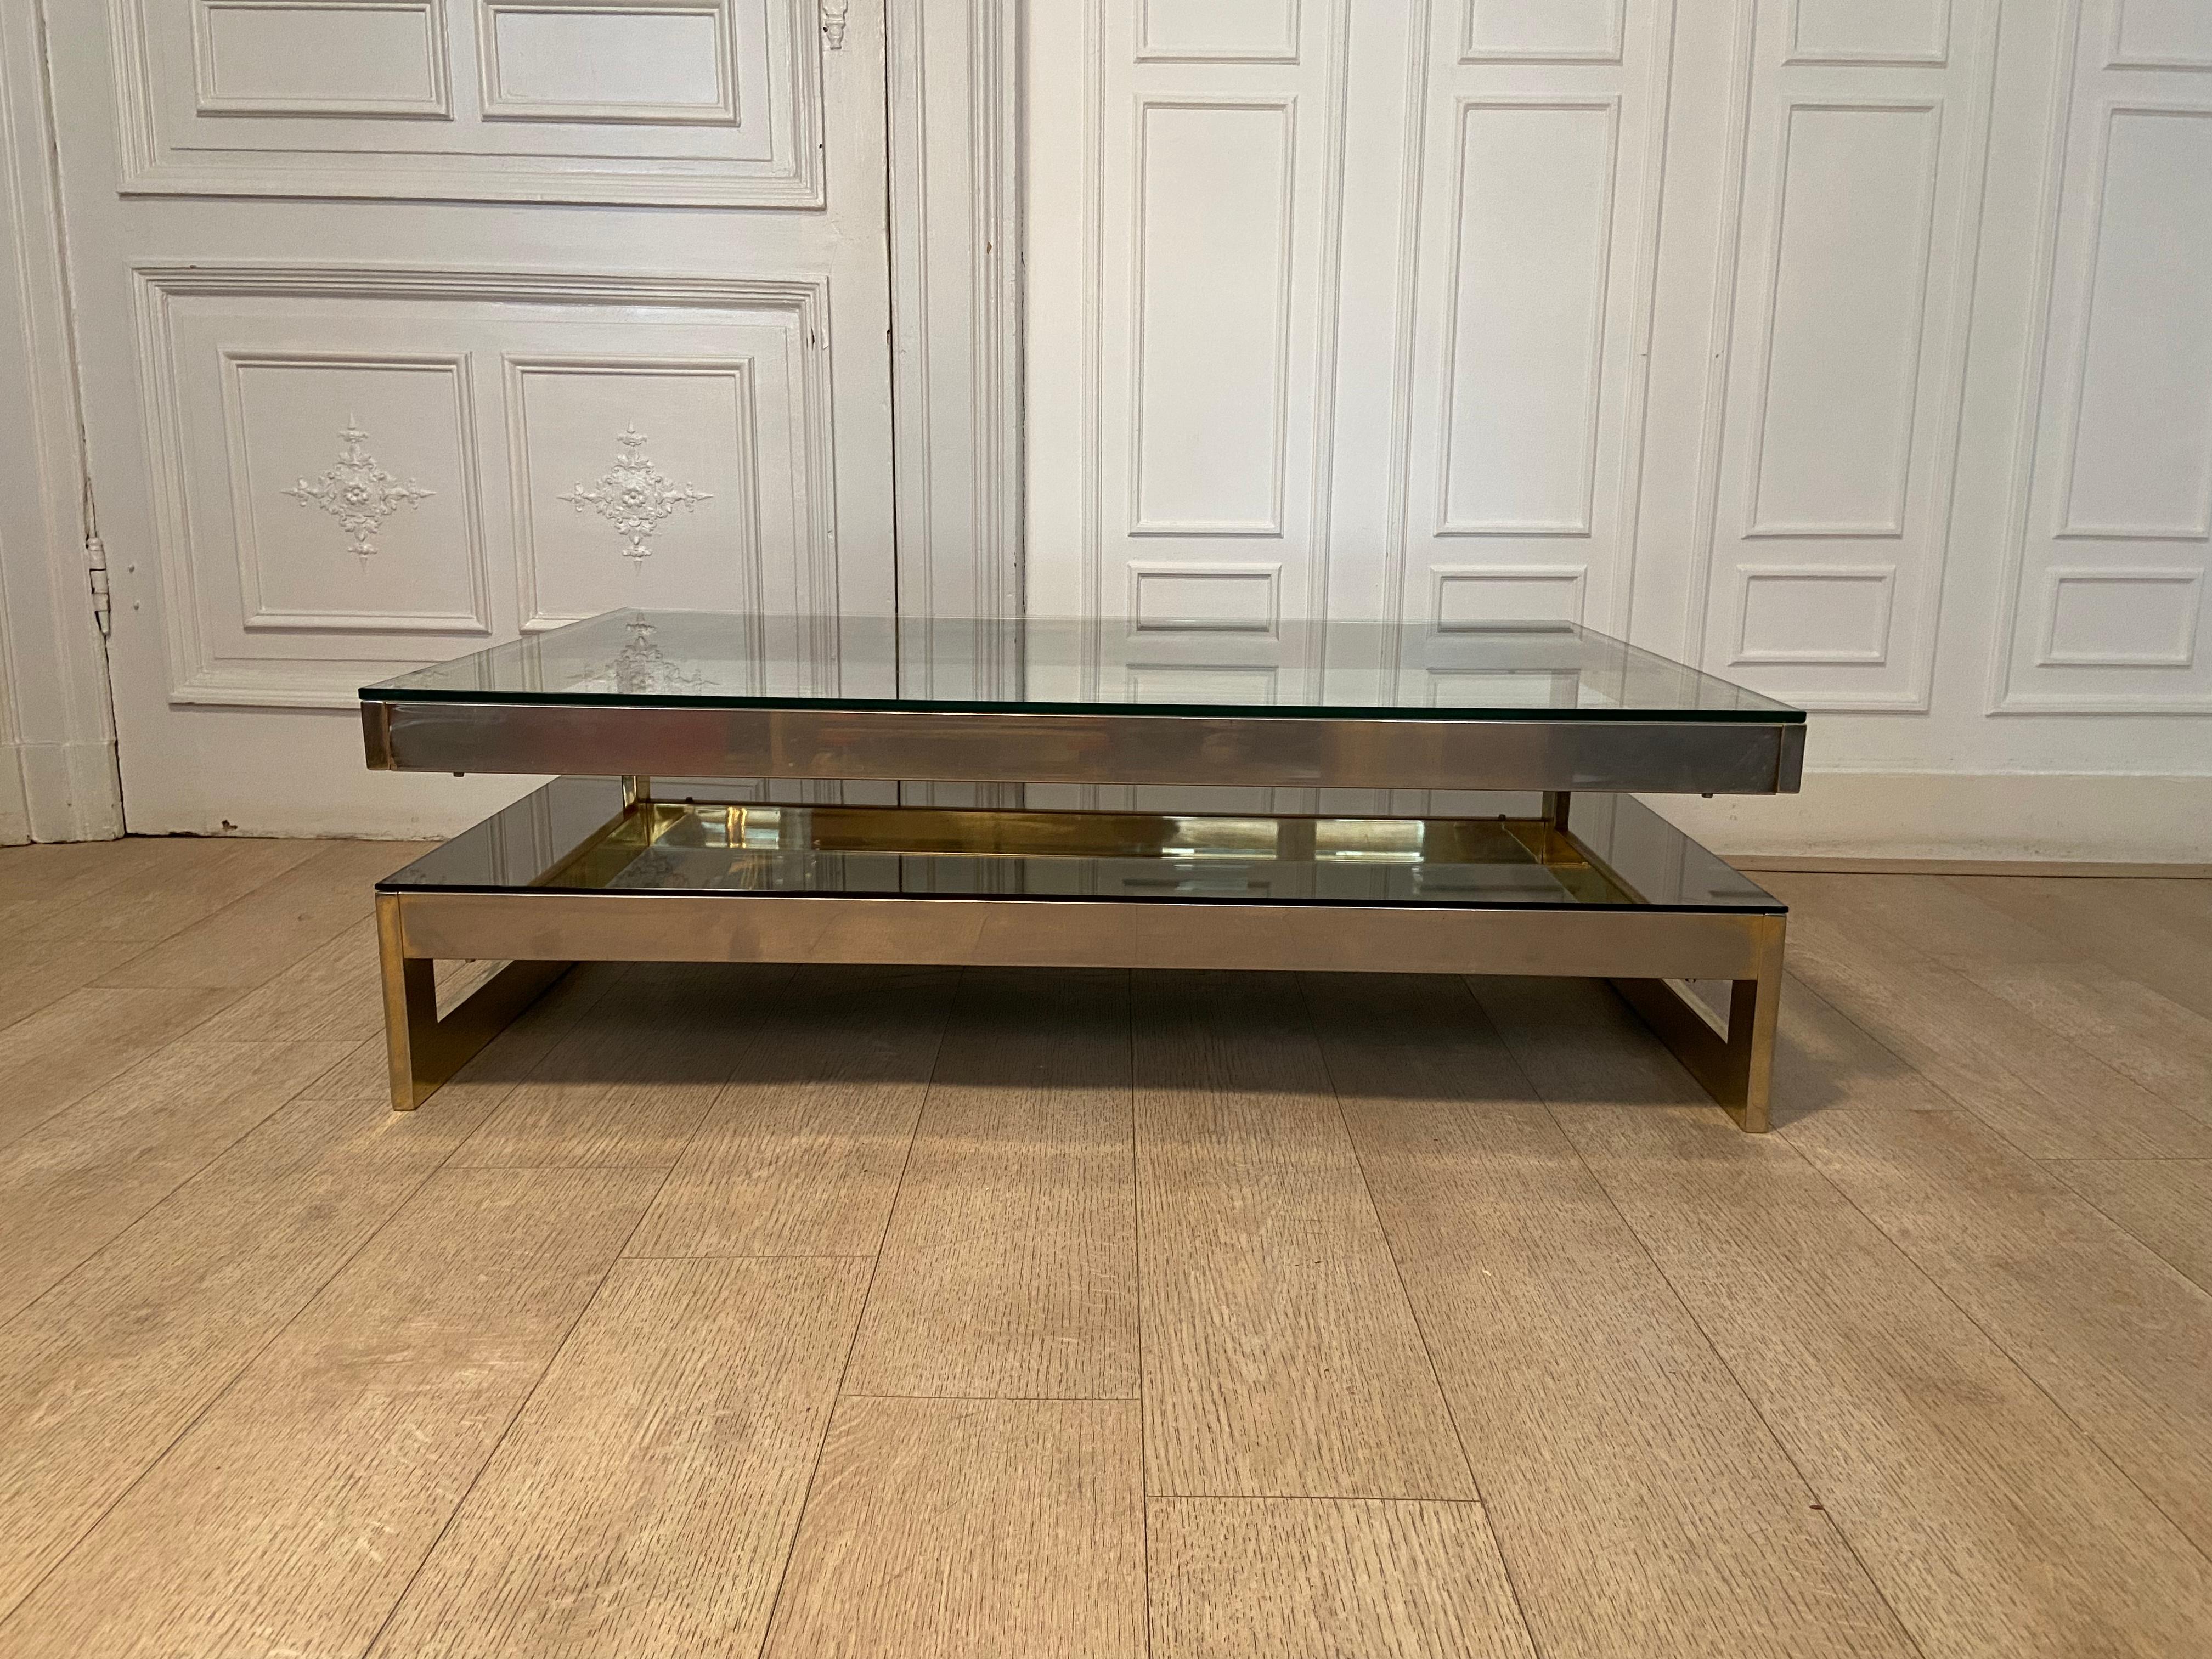 Famous g-shaped coffee table from the Belgian manufacture belgo chrom and produced in the 70s. Metal structure gilded with fine 23 carat gold. Lower shelf in bronze mirror and upper shelf in transparent glass.